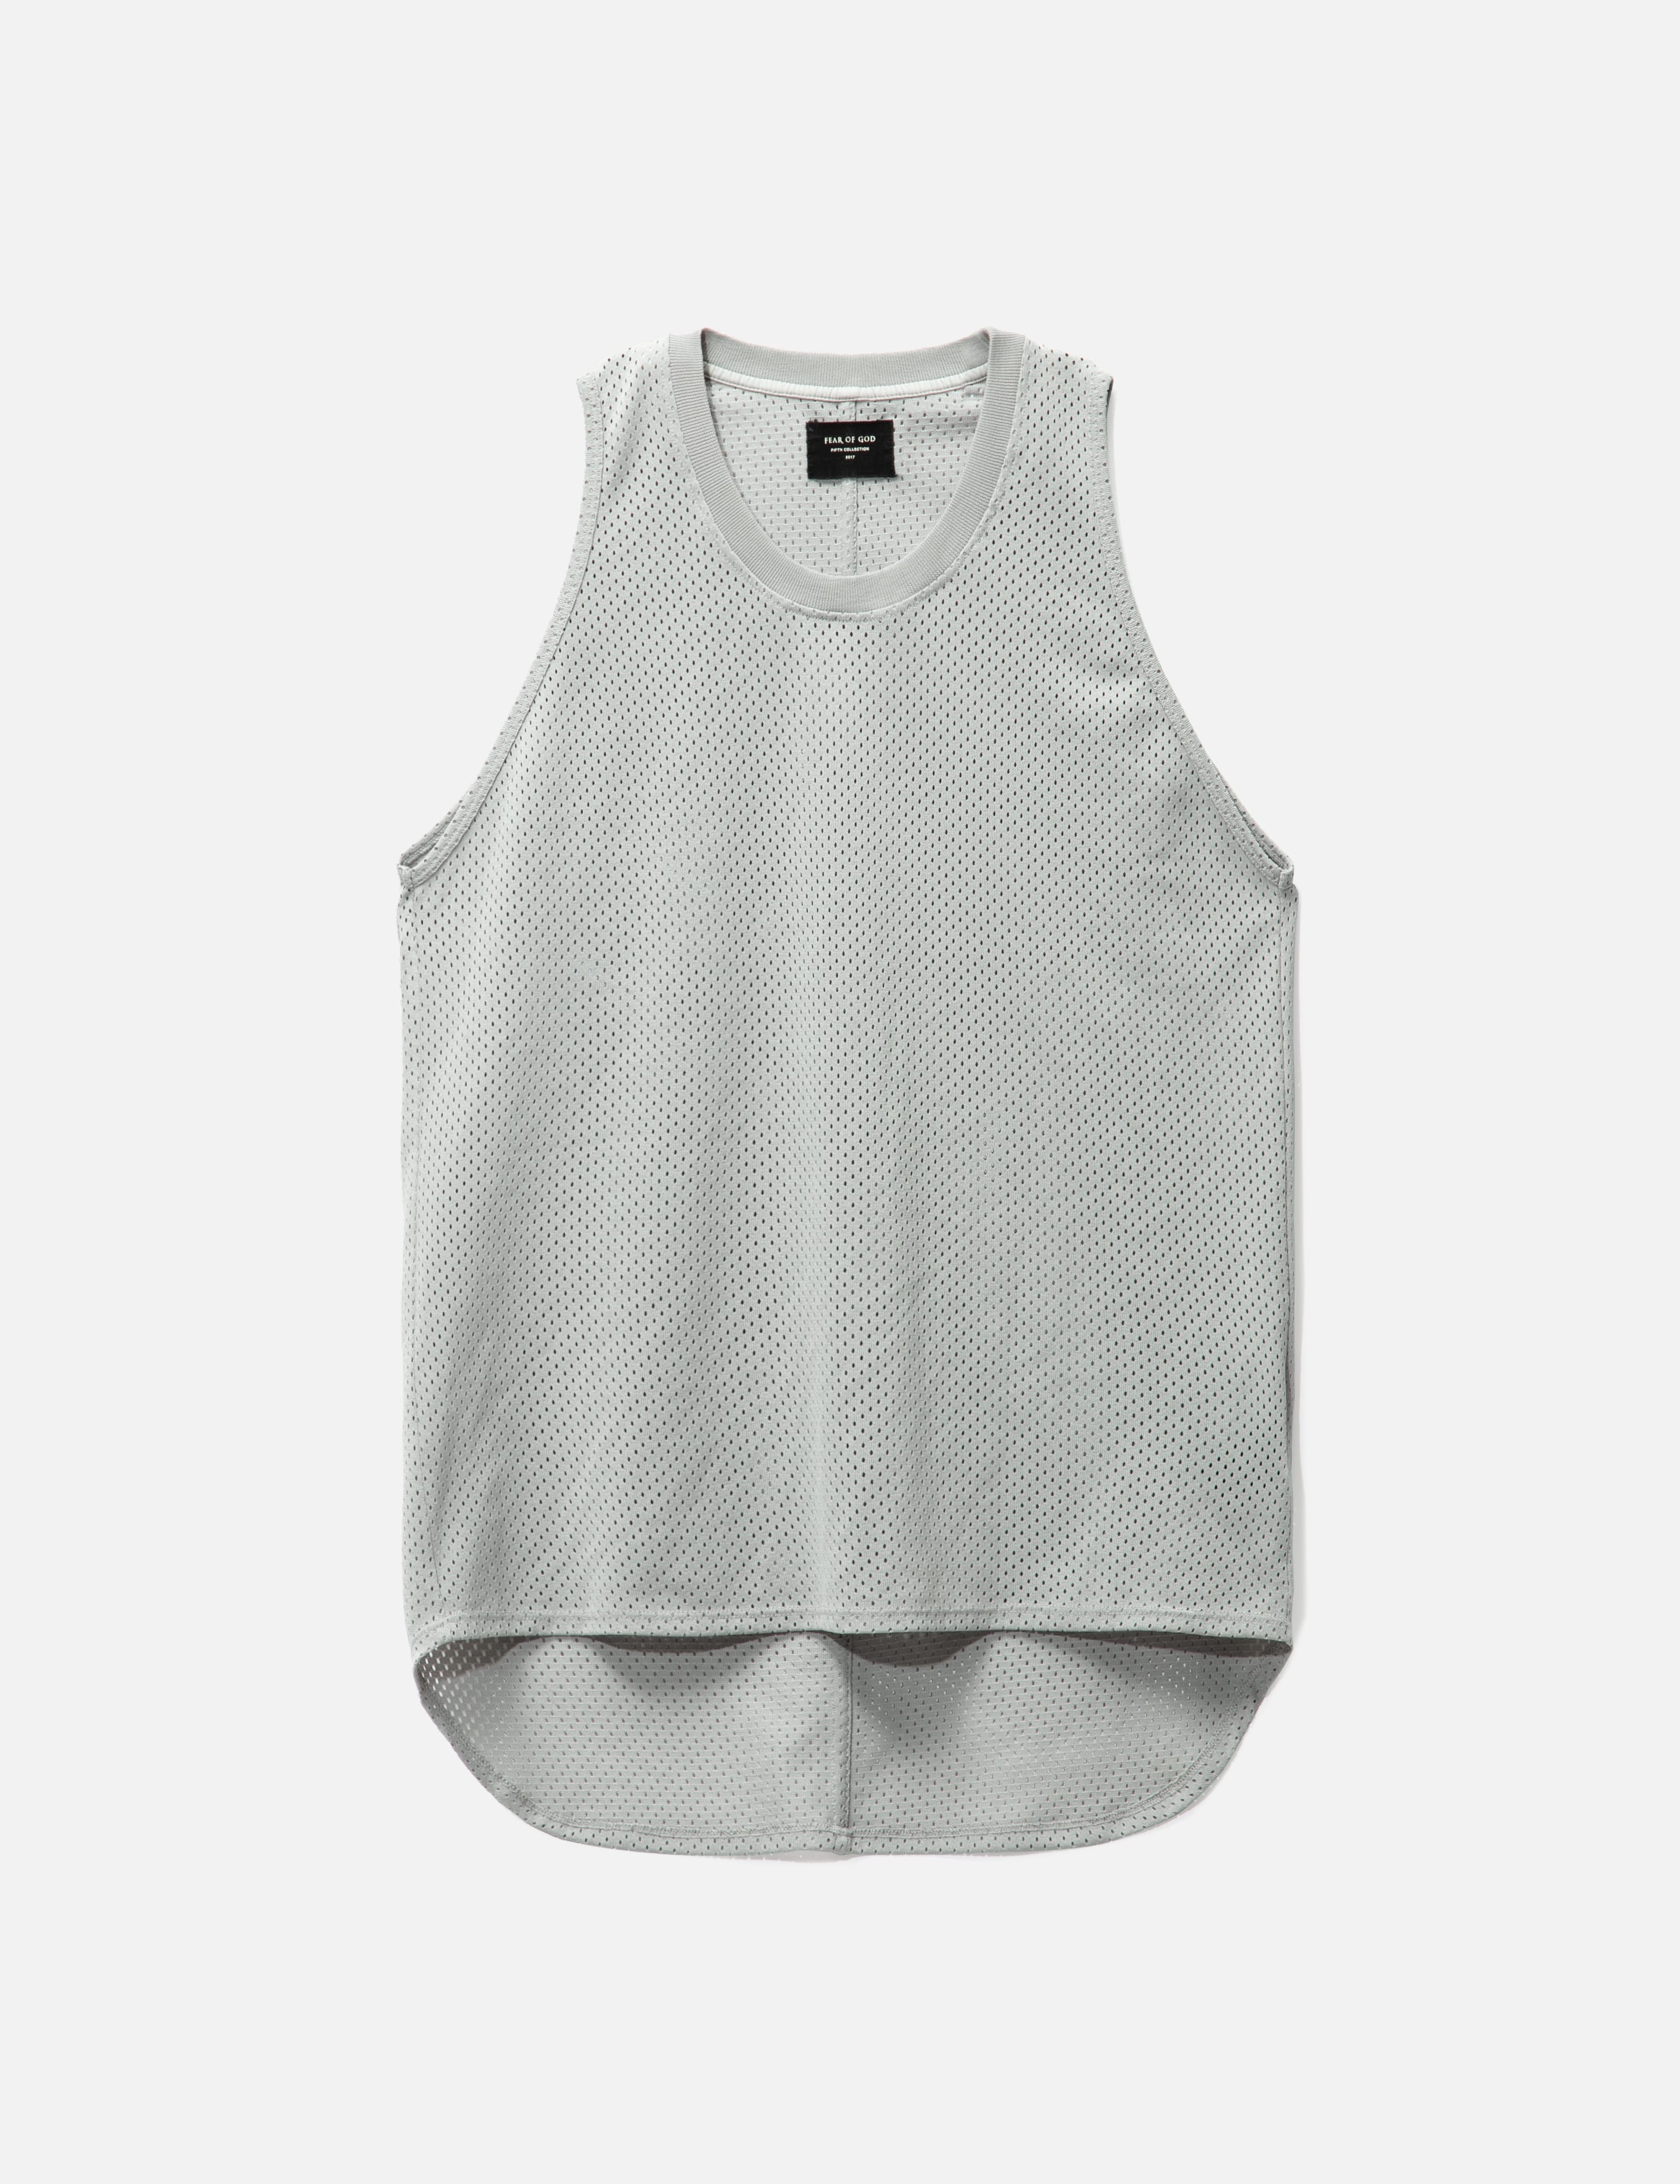 Fear of God - FEAR OF GOD 2017 FIFTH COLLECTION MESH VEST | HBX - Globally  Curated Fashion and Lifestyle by Hypebeast